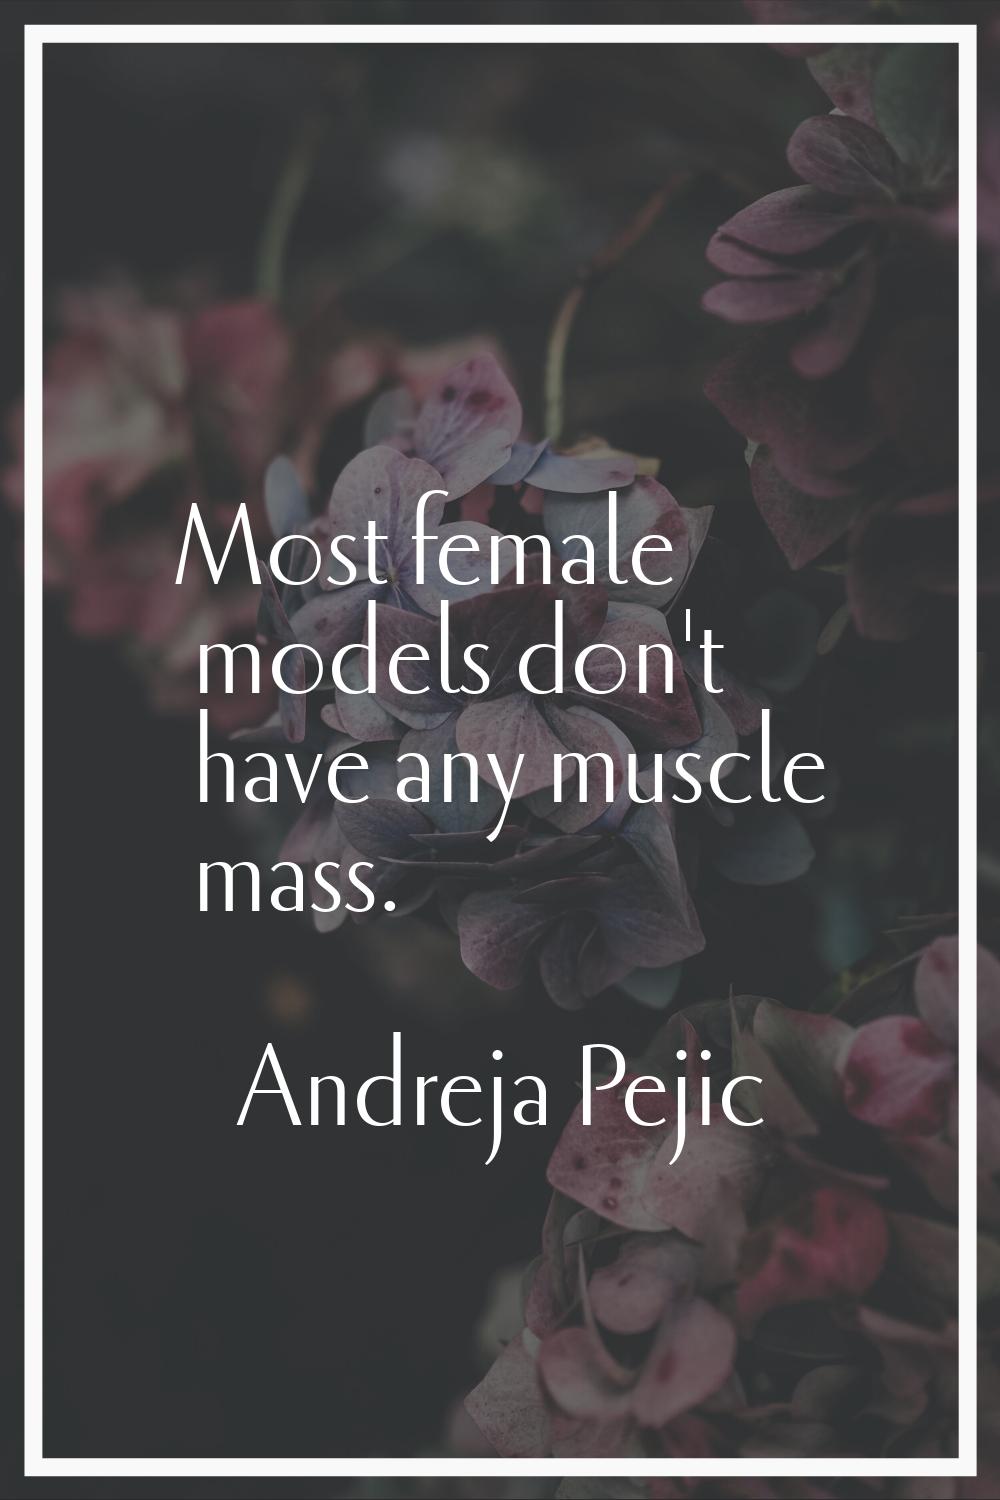 Most female models don't have any muscle mass.